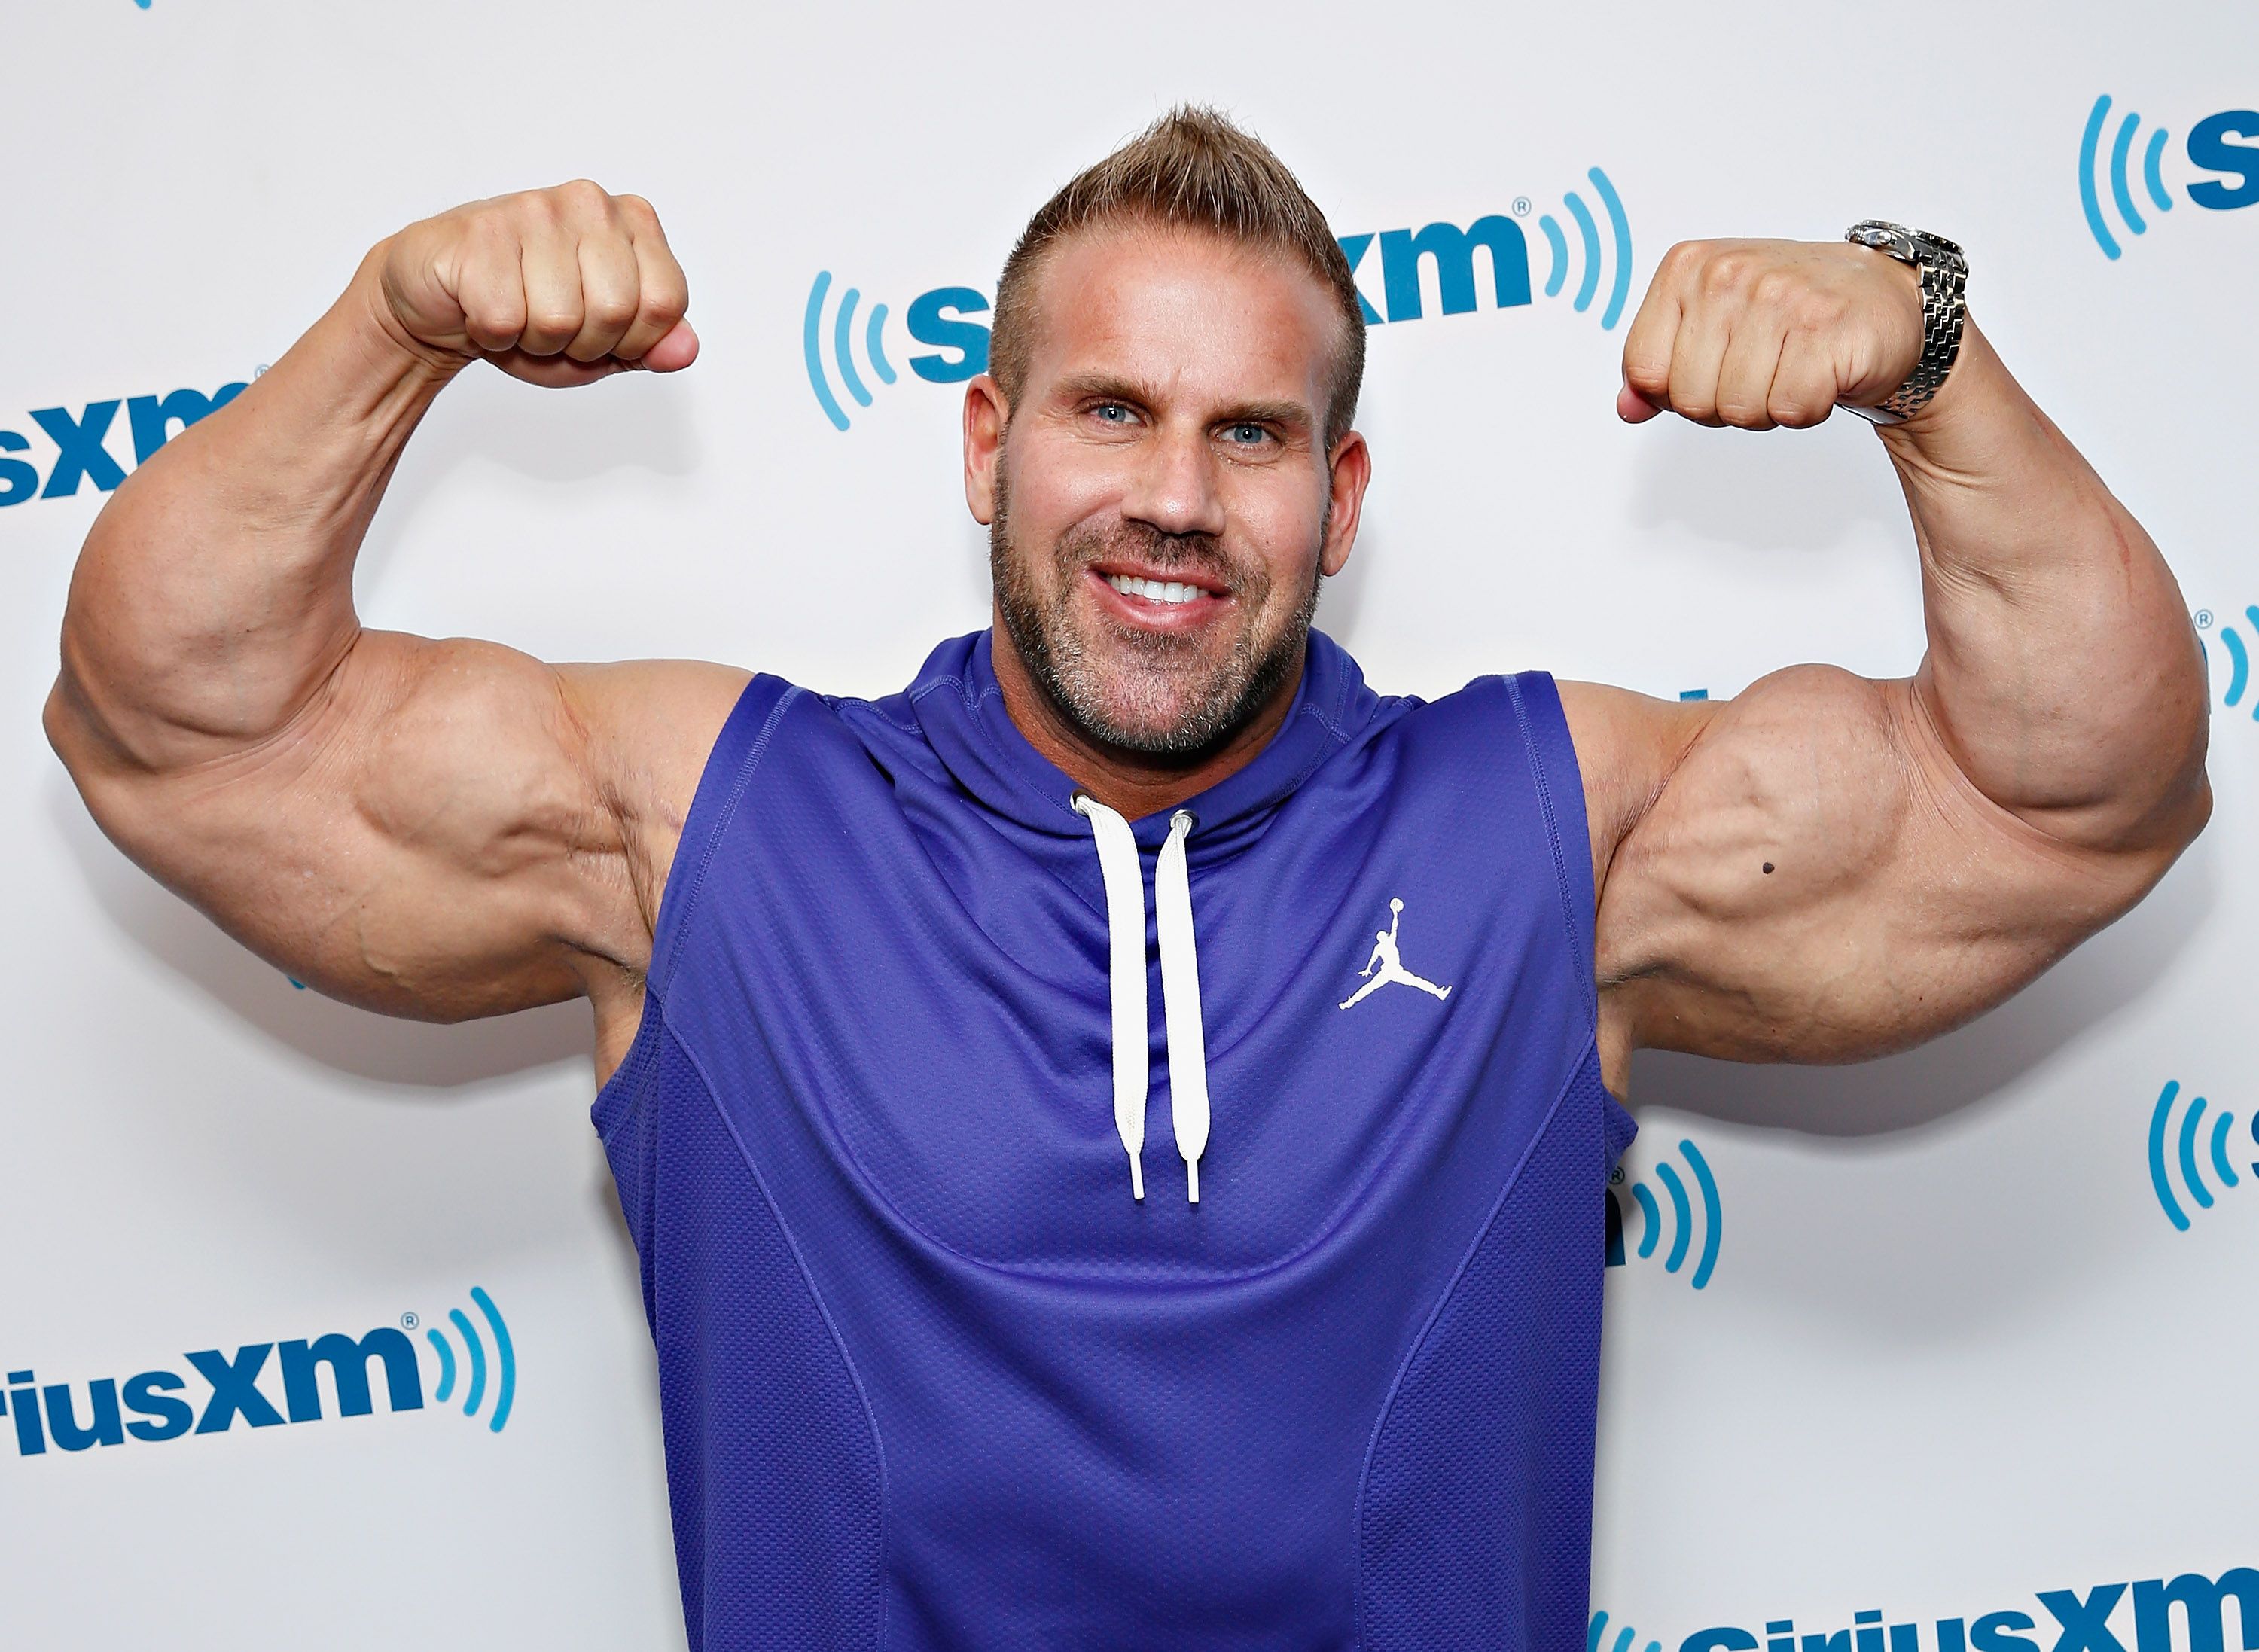 Four-Time Mr. Olympia Winner﻿ Jay Cutler Reveals the Steroids He Took  During His Career and Now